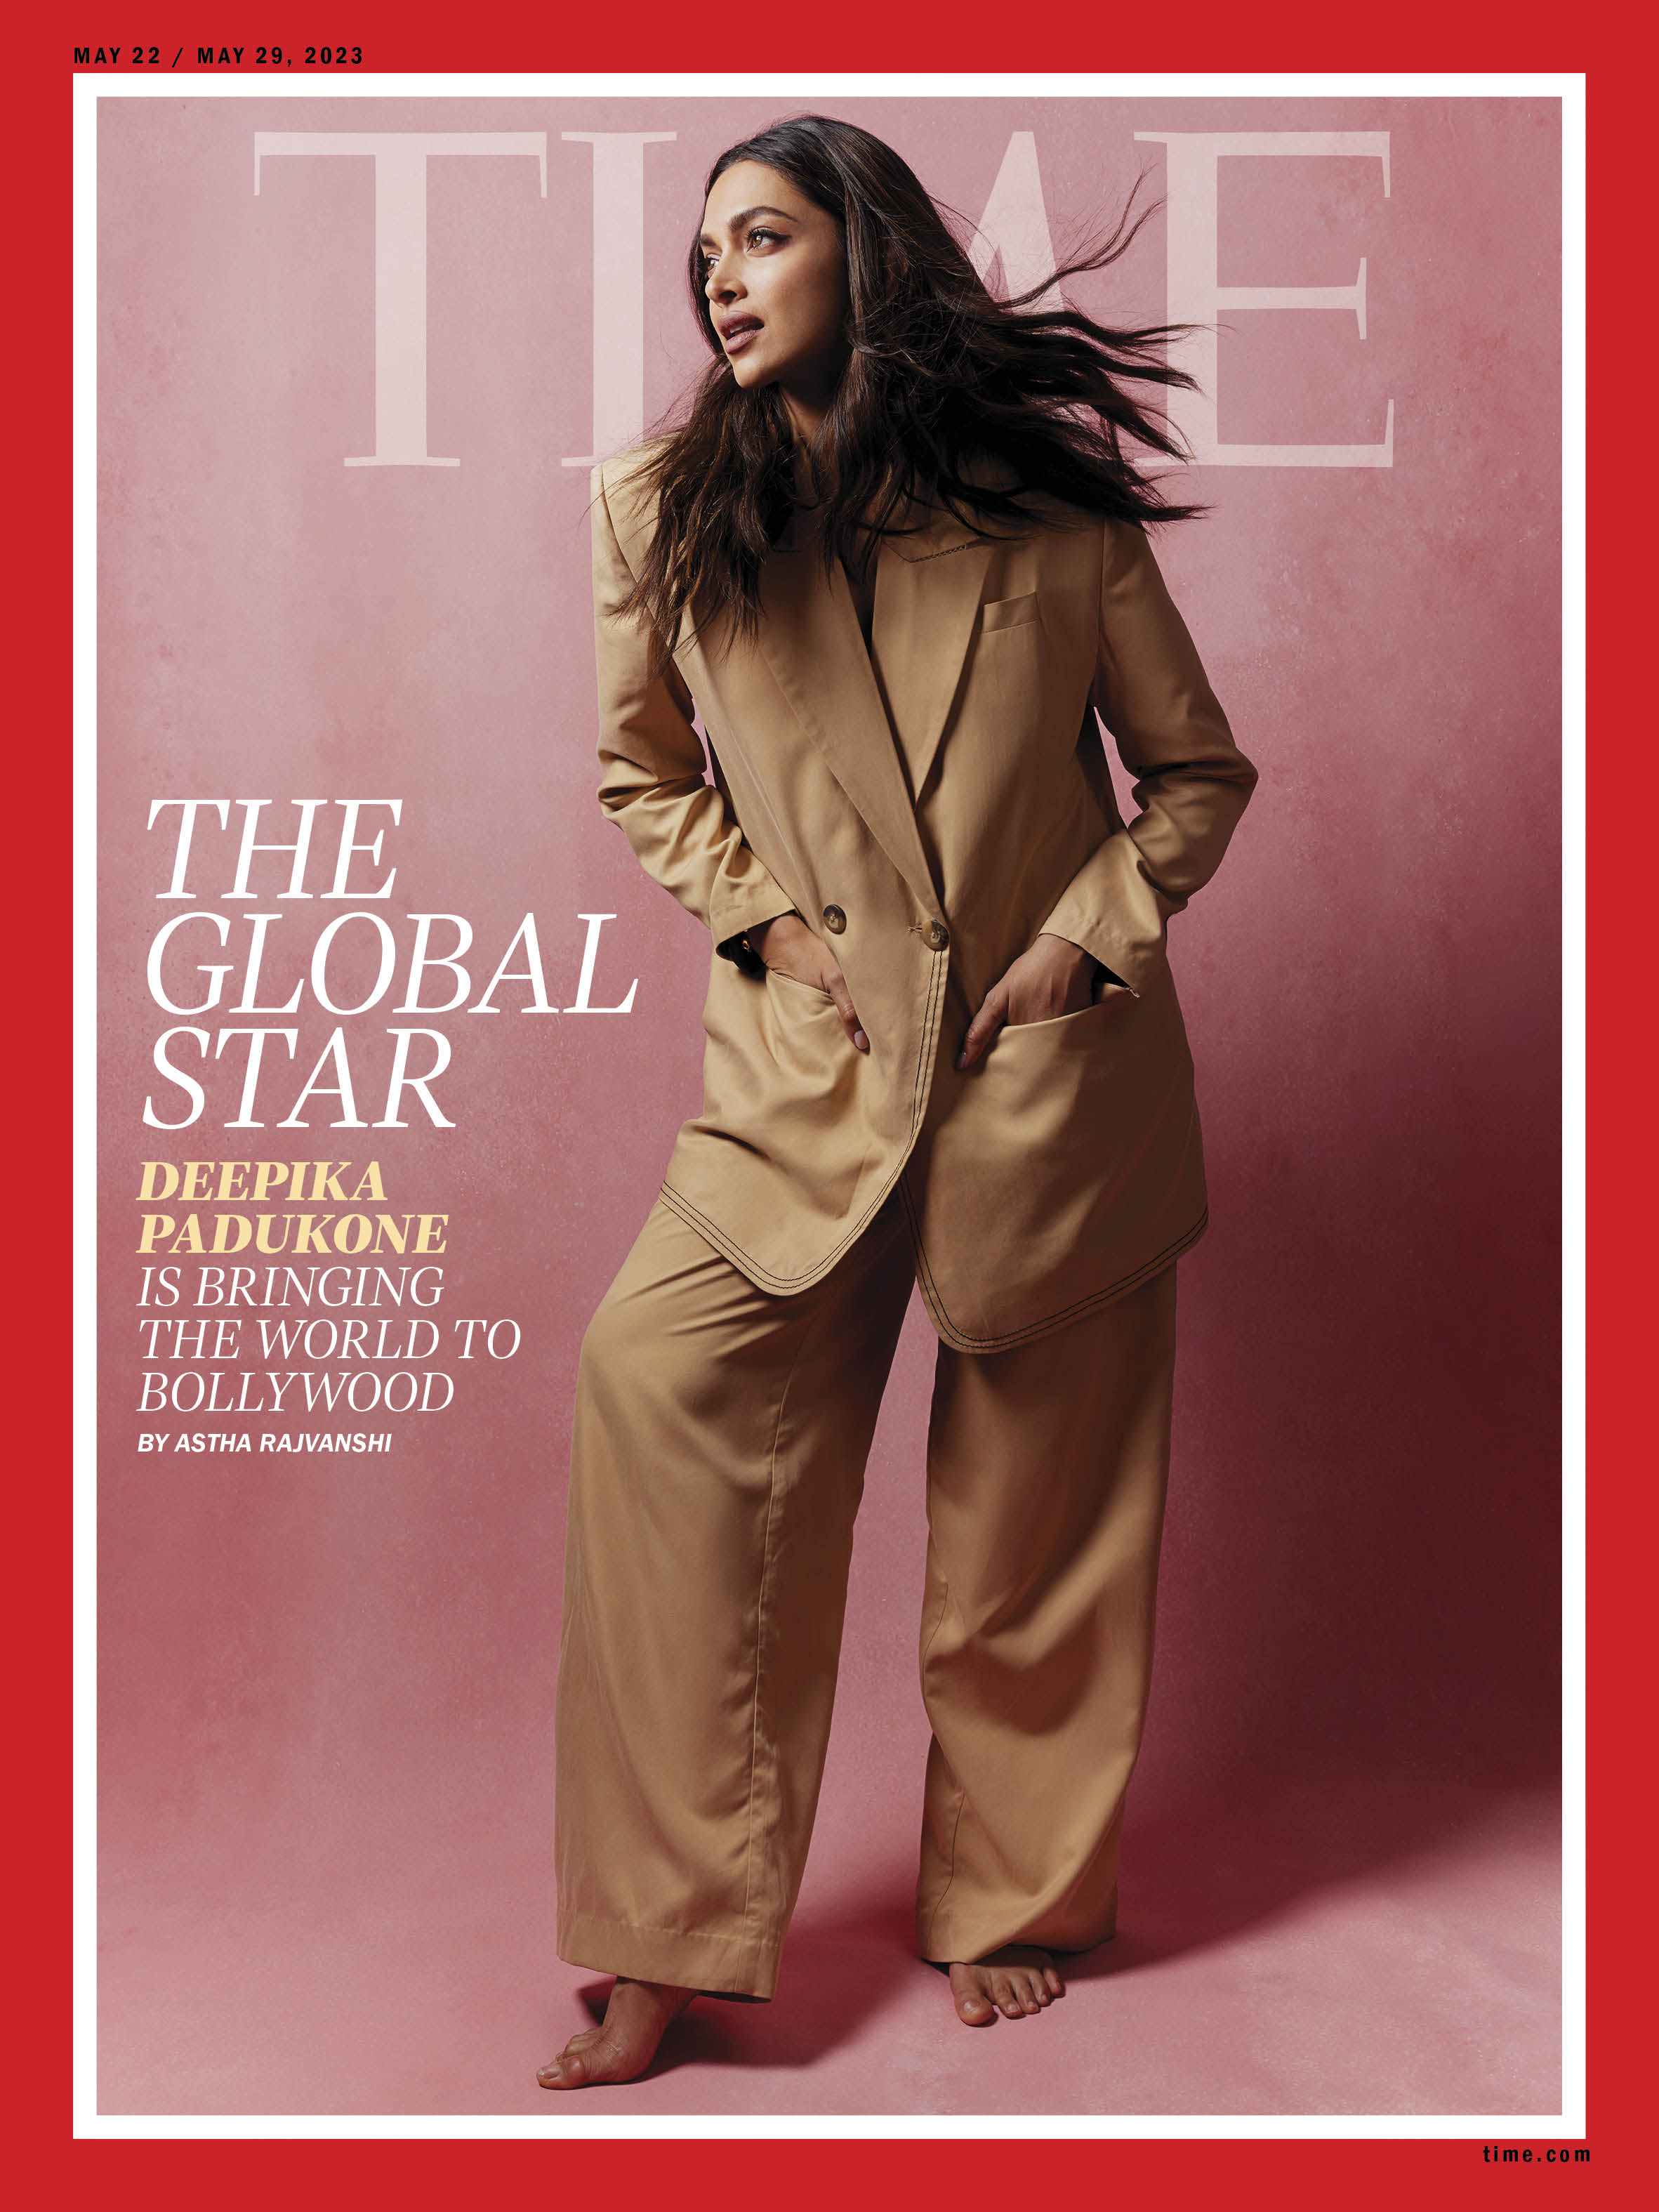 Heroinexxxx - Deepika Padukone on Bollywood and Becoming a Global Star | Time